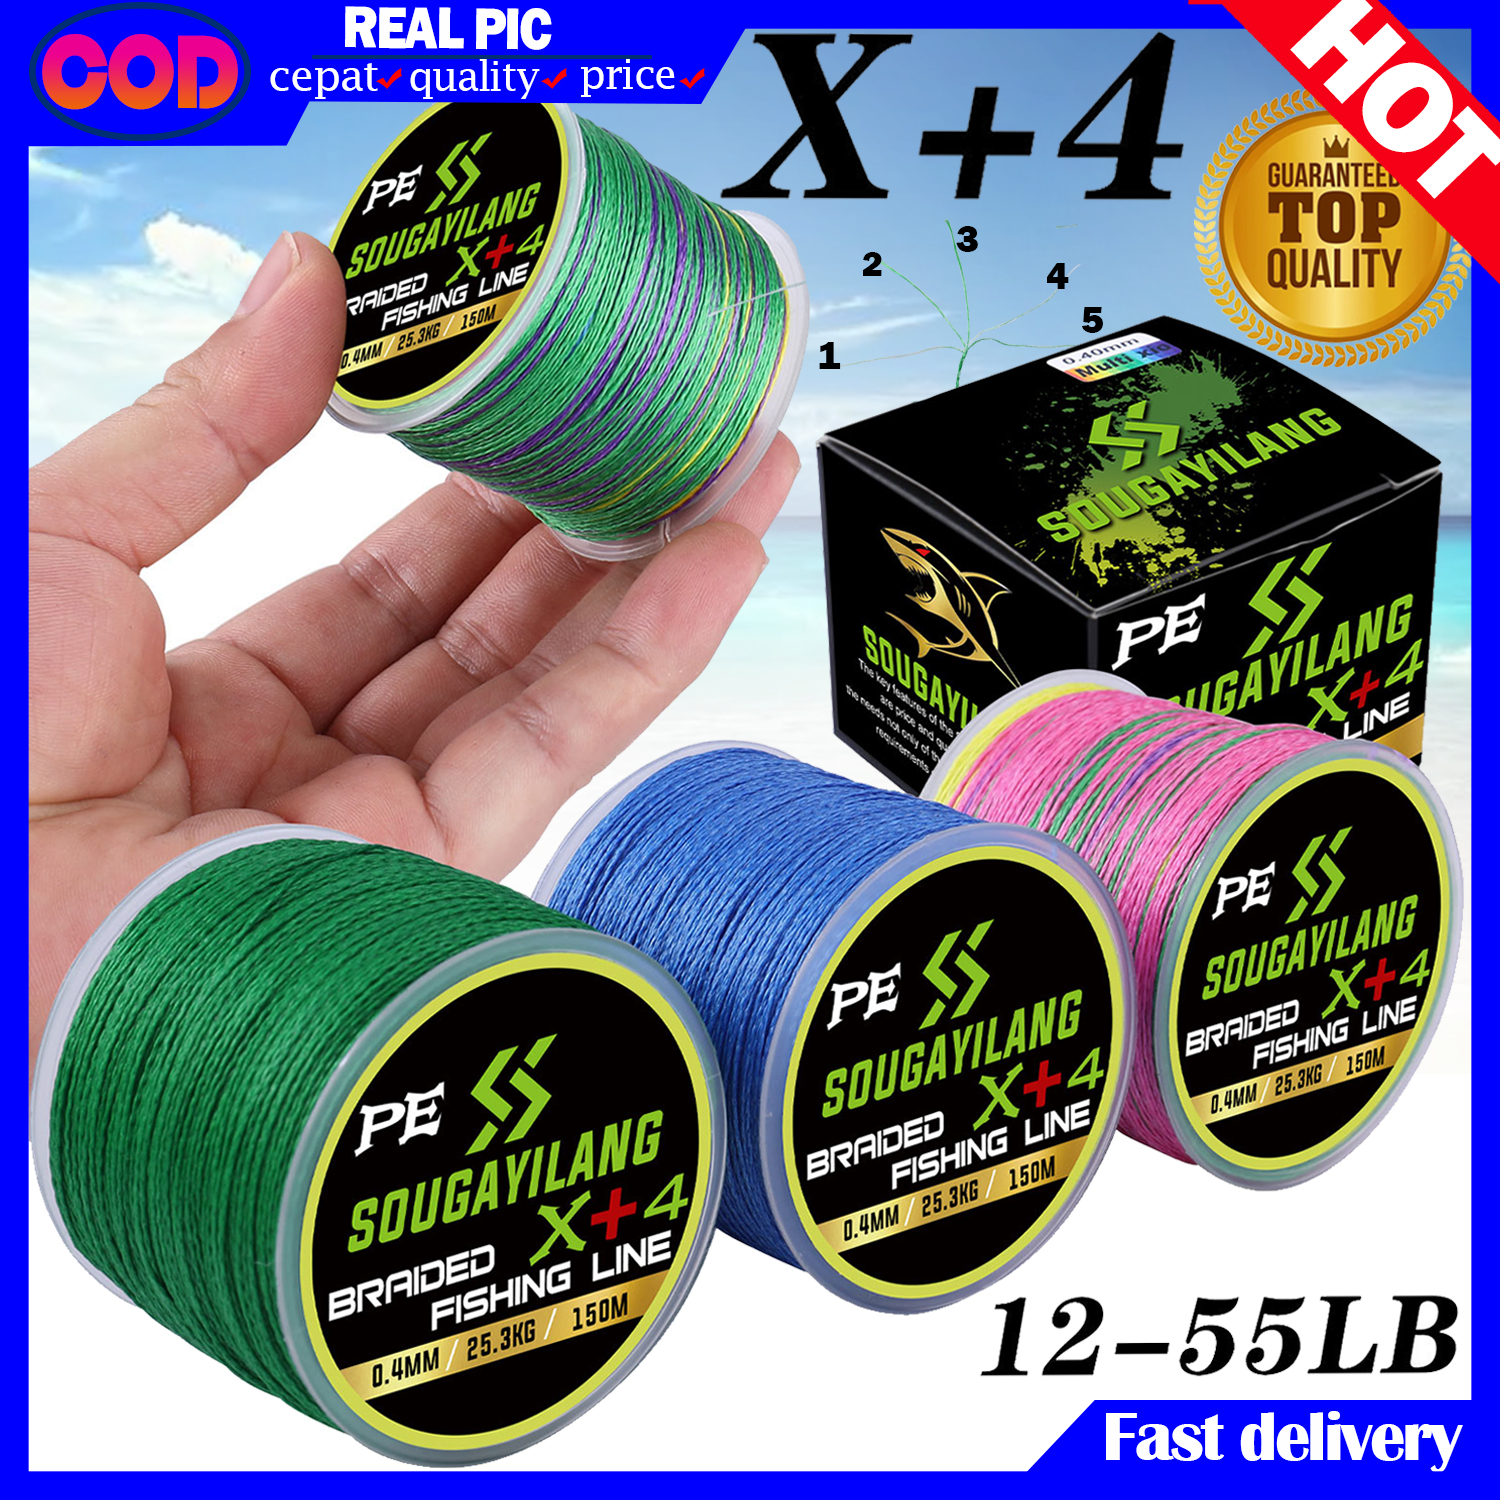 Buy Braided Line For Fishing 8trands 60lb online